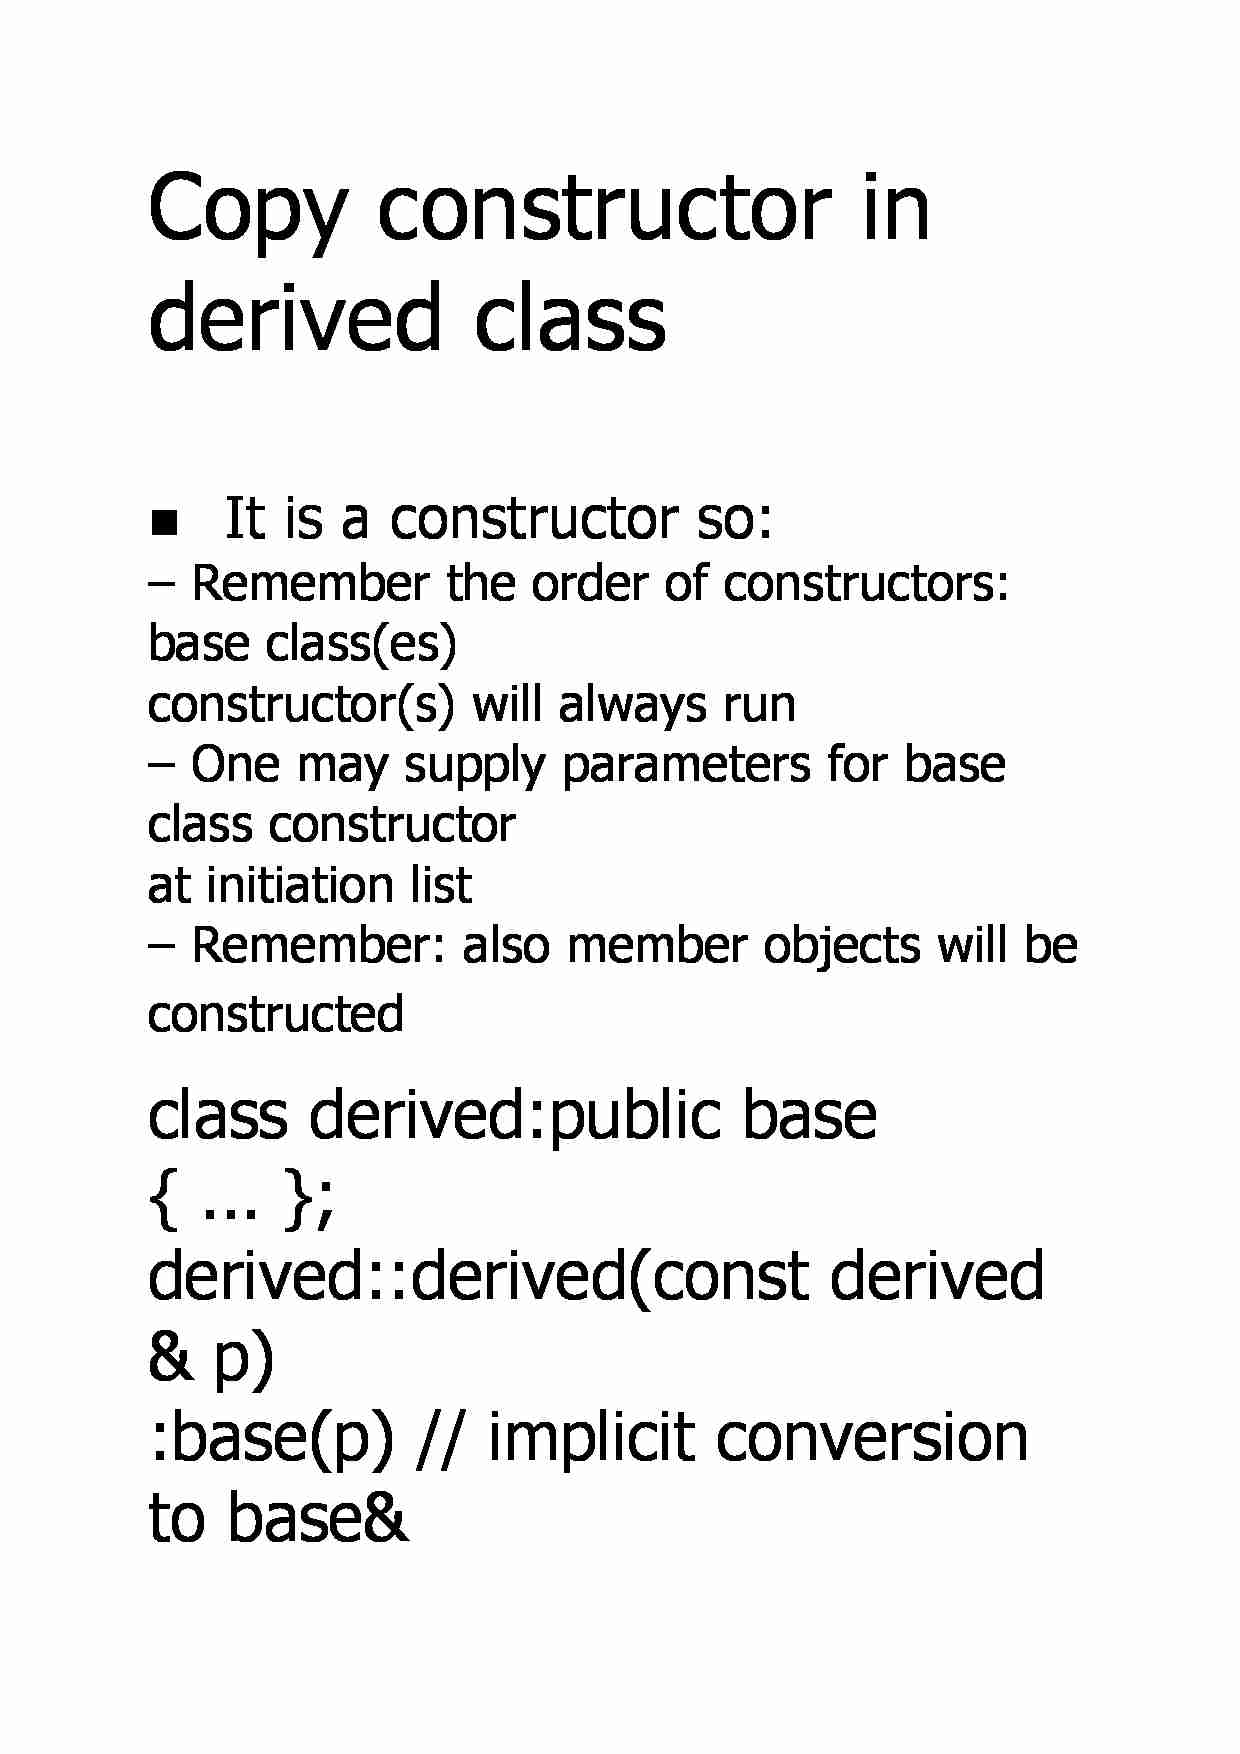 Copy constructor in derived class - strona 1